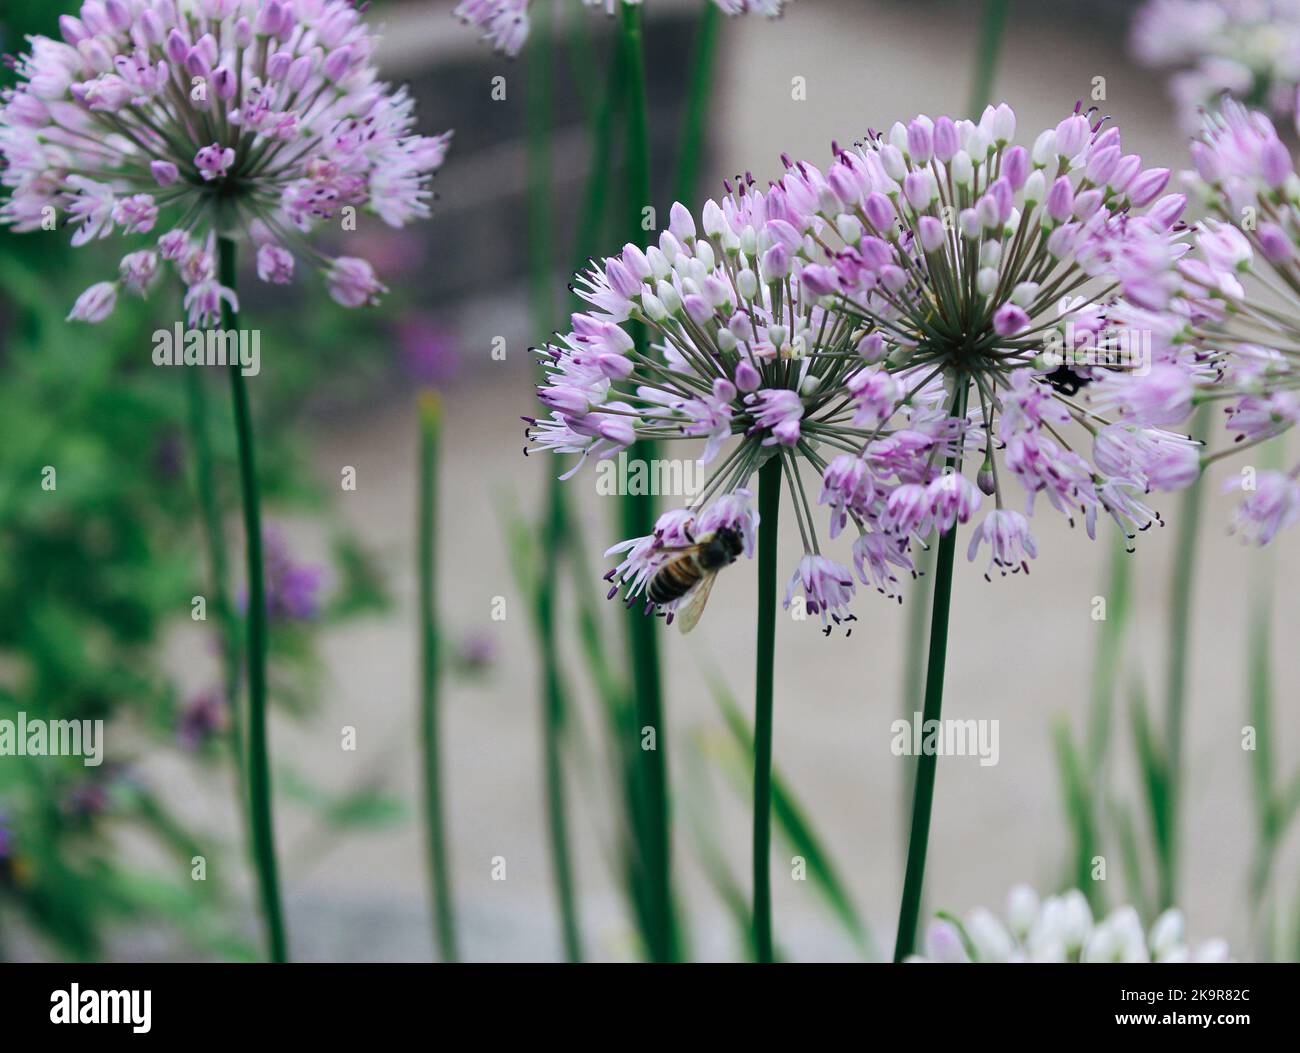 Bee on ornamental garden plant, big round violet flowers against green background, decorative persian onion, purple chives flower. Blooming purple orn Stock Photo